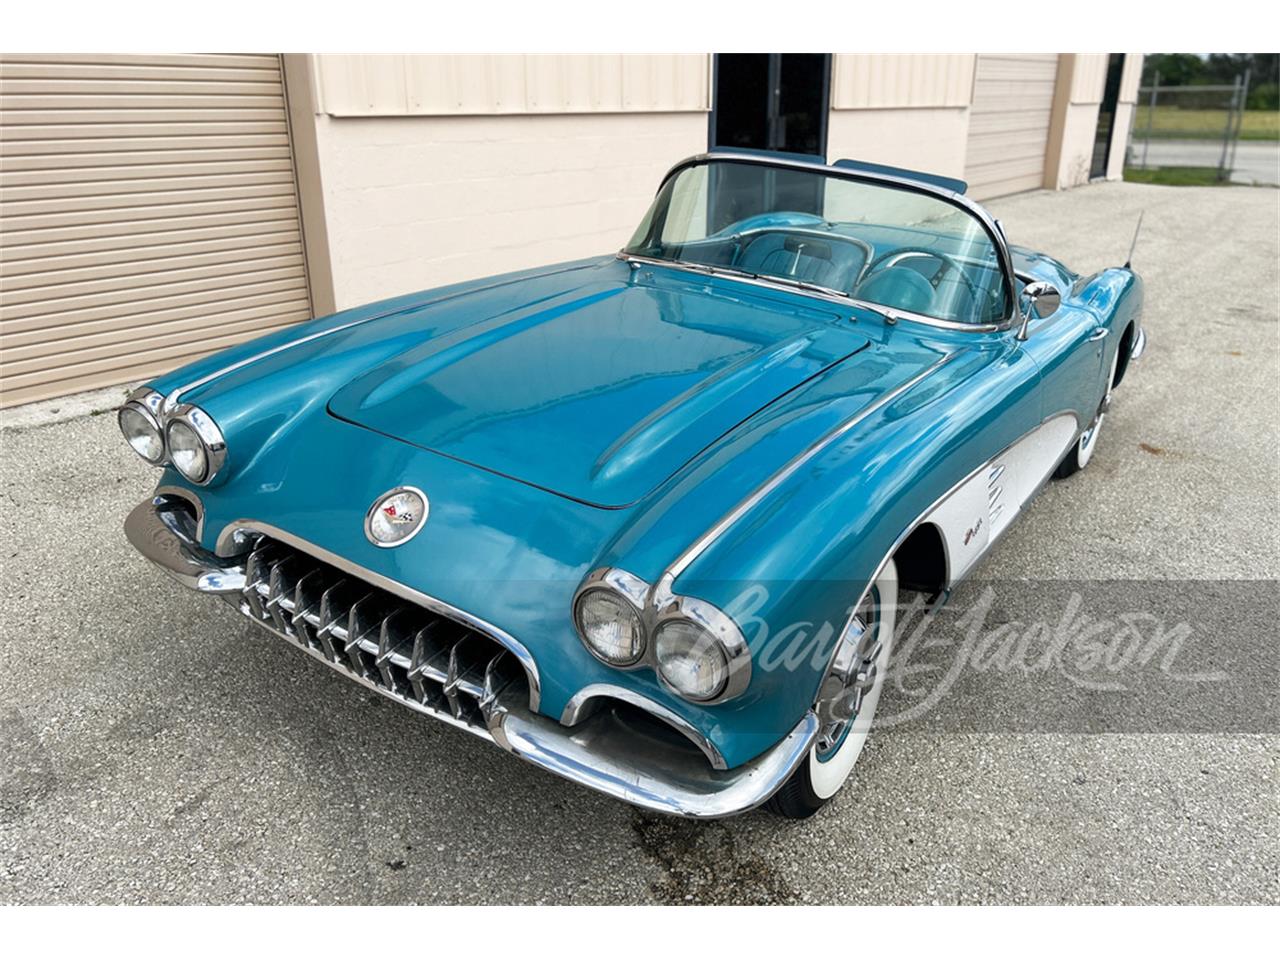 For Sale at Auction: 1960 Chevrolet Corvette in Scottsdale, Arizona for sale in Scottsdale, AZ